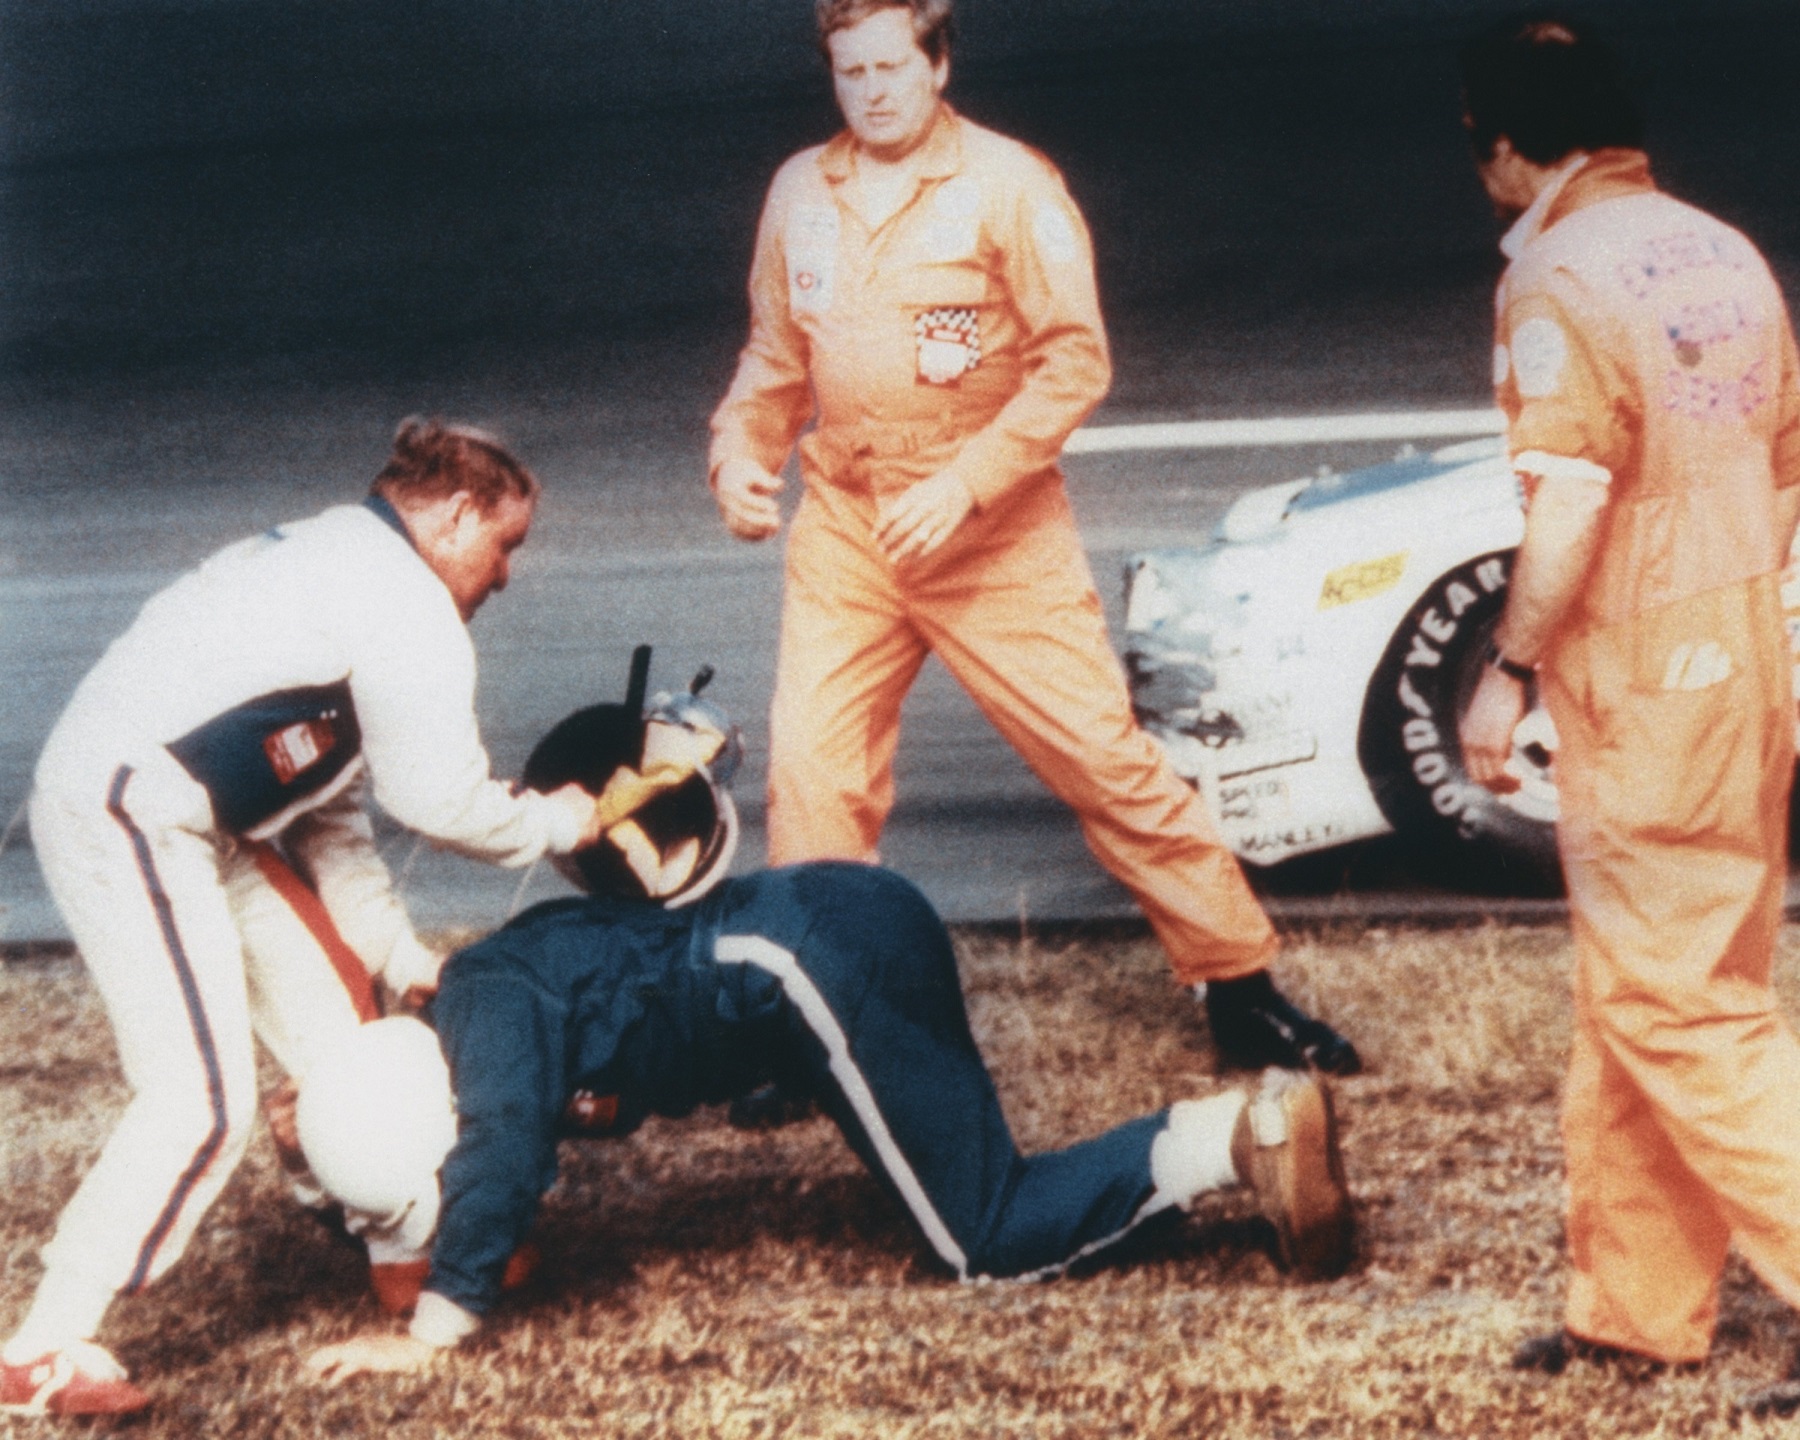 Cale Yarborough hits Bobby Allison with his helmet after the two crashed during the last lap of the 1979 Daytona 500 at Daytona International Speedway.  ISC Archives/CQ-Roll Call Group via Getty Images